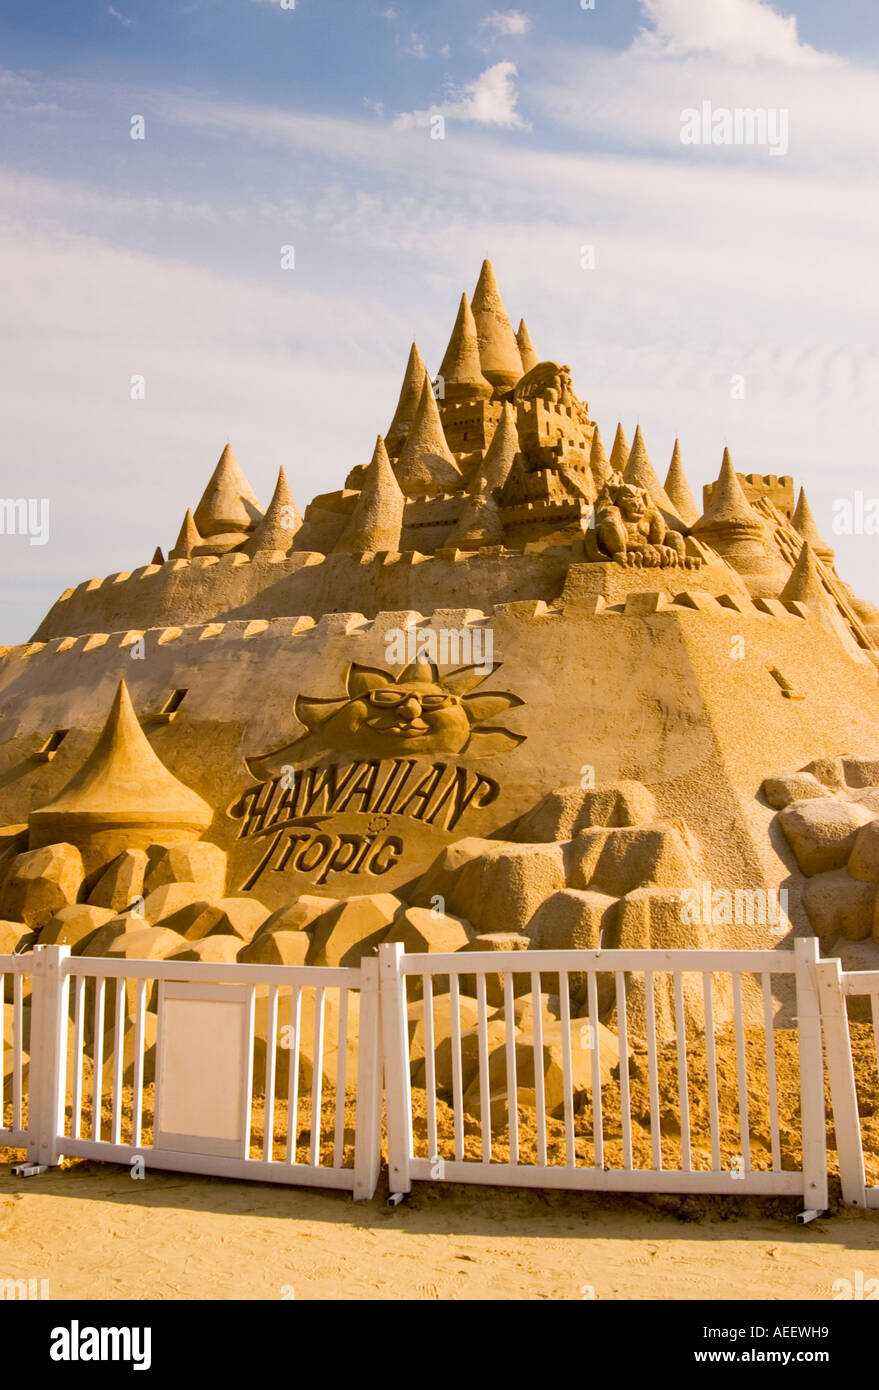 Worlds Largest Sandcastle at Myrtle Beach SC USA Stock Photo